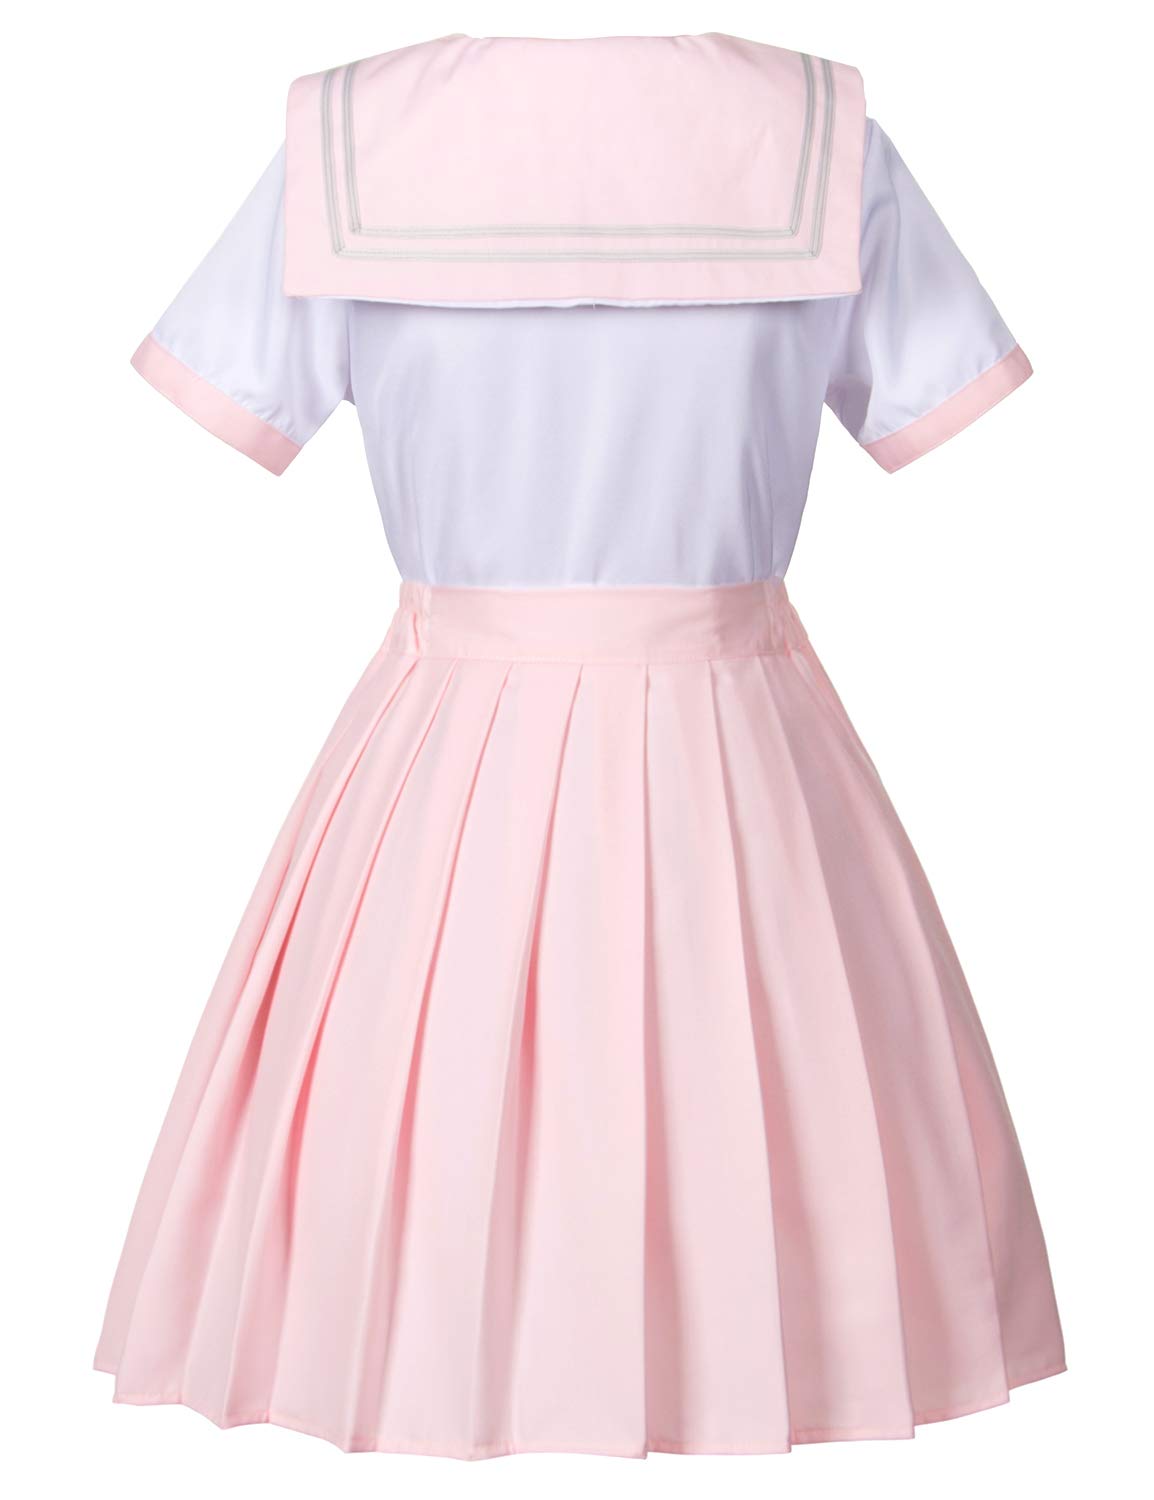 Cosplay.fm Women's Anime Cosplay Costume Pink Dress Outfit with Accessories  (XL, Pink) : Amazon.co.uk: Toys & Games